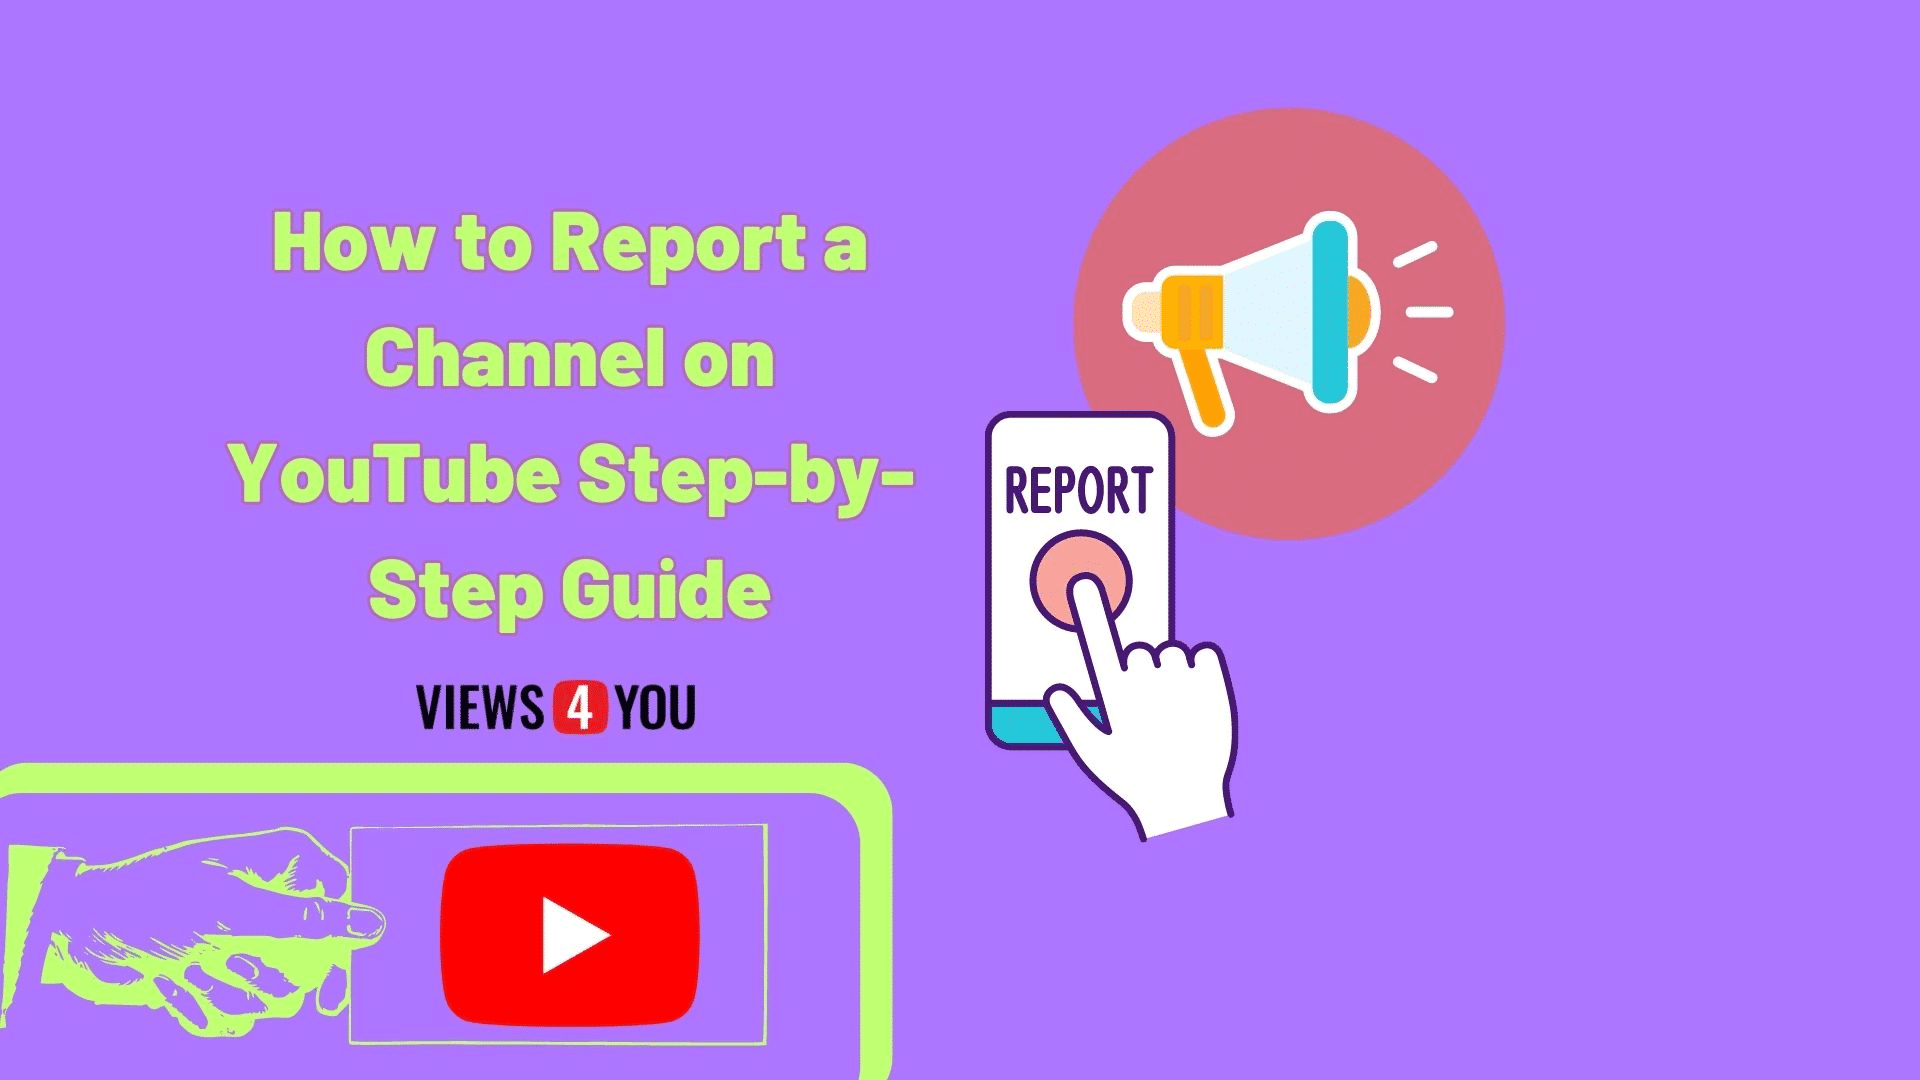 How to Report a Channel on YouTube Step-by-Step Guide